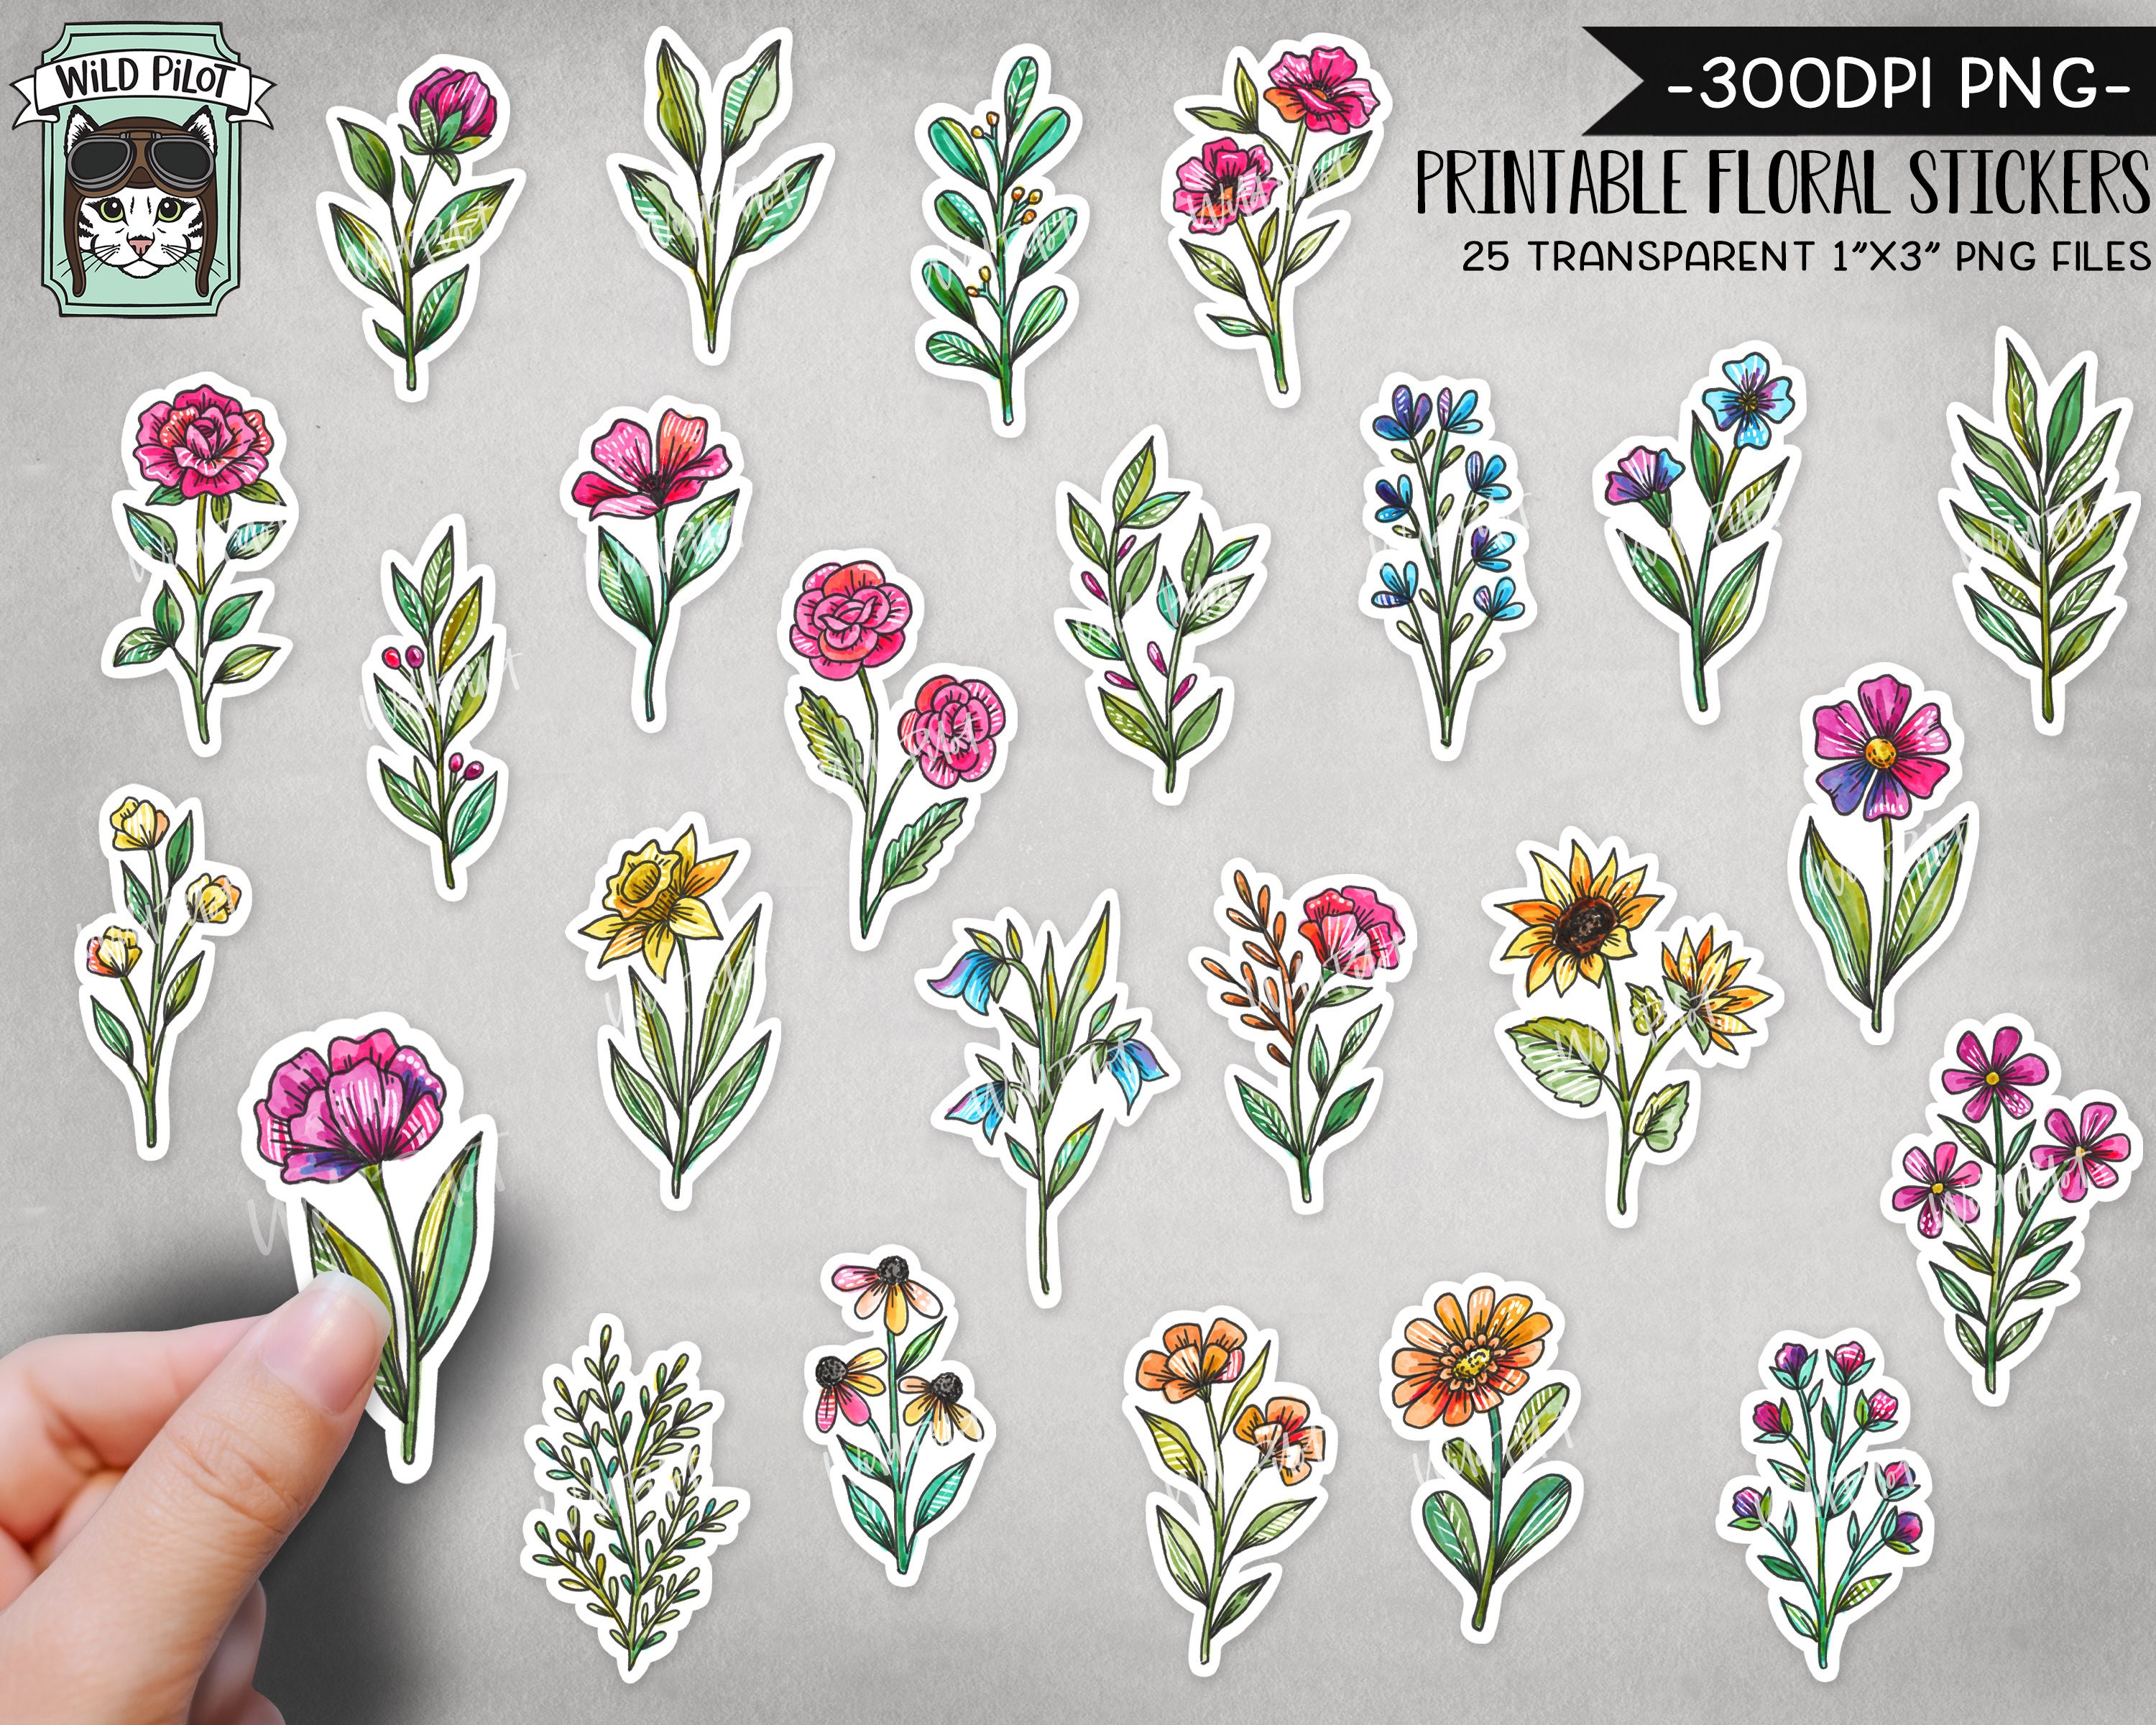 Fancy Flowers Stickers to Download/Print & Cut!